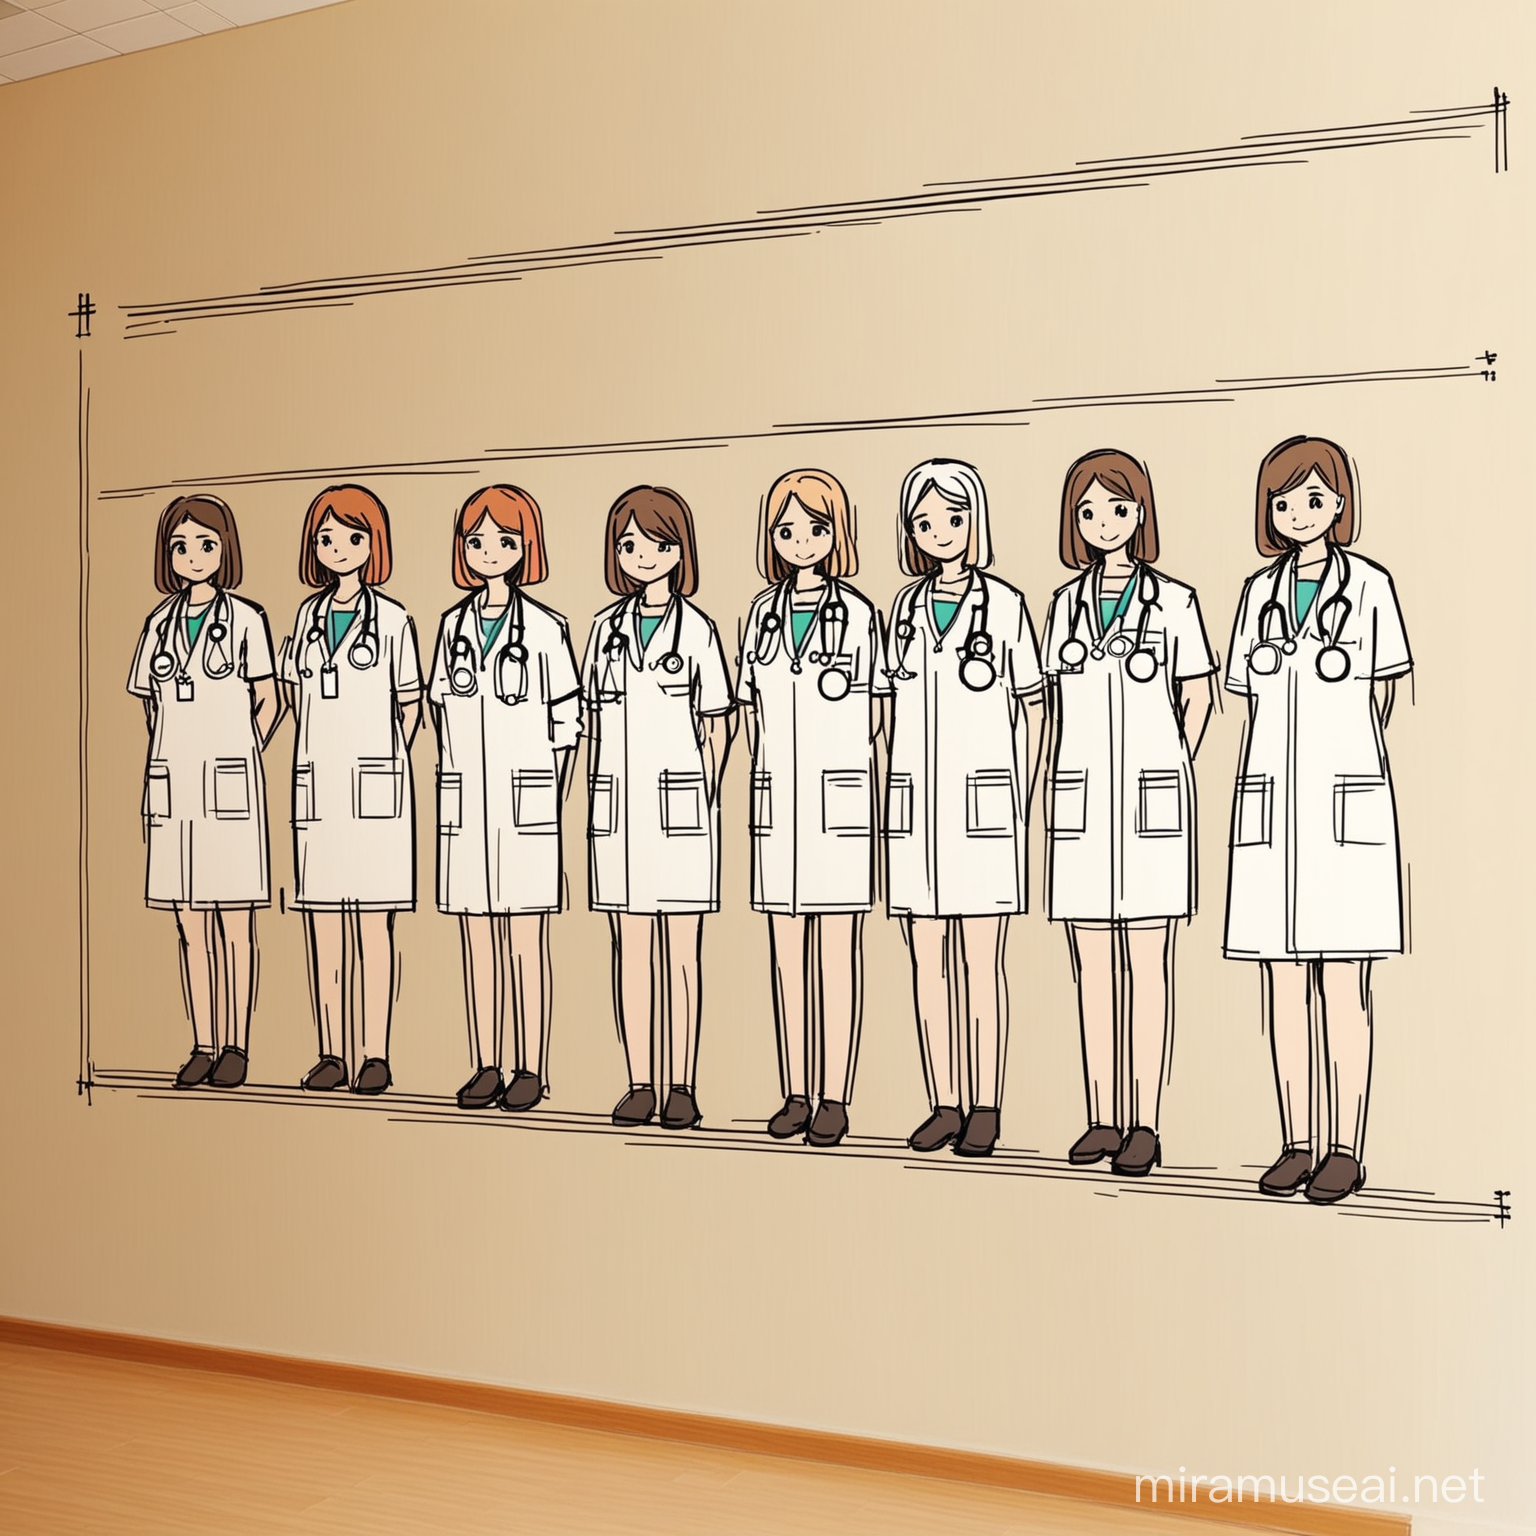 Simple Drawing of Polish Women Doctors on Wall